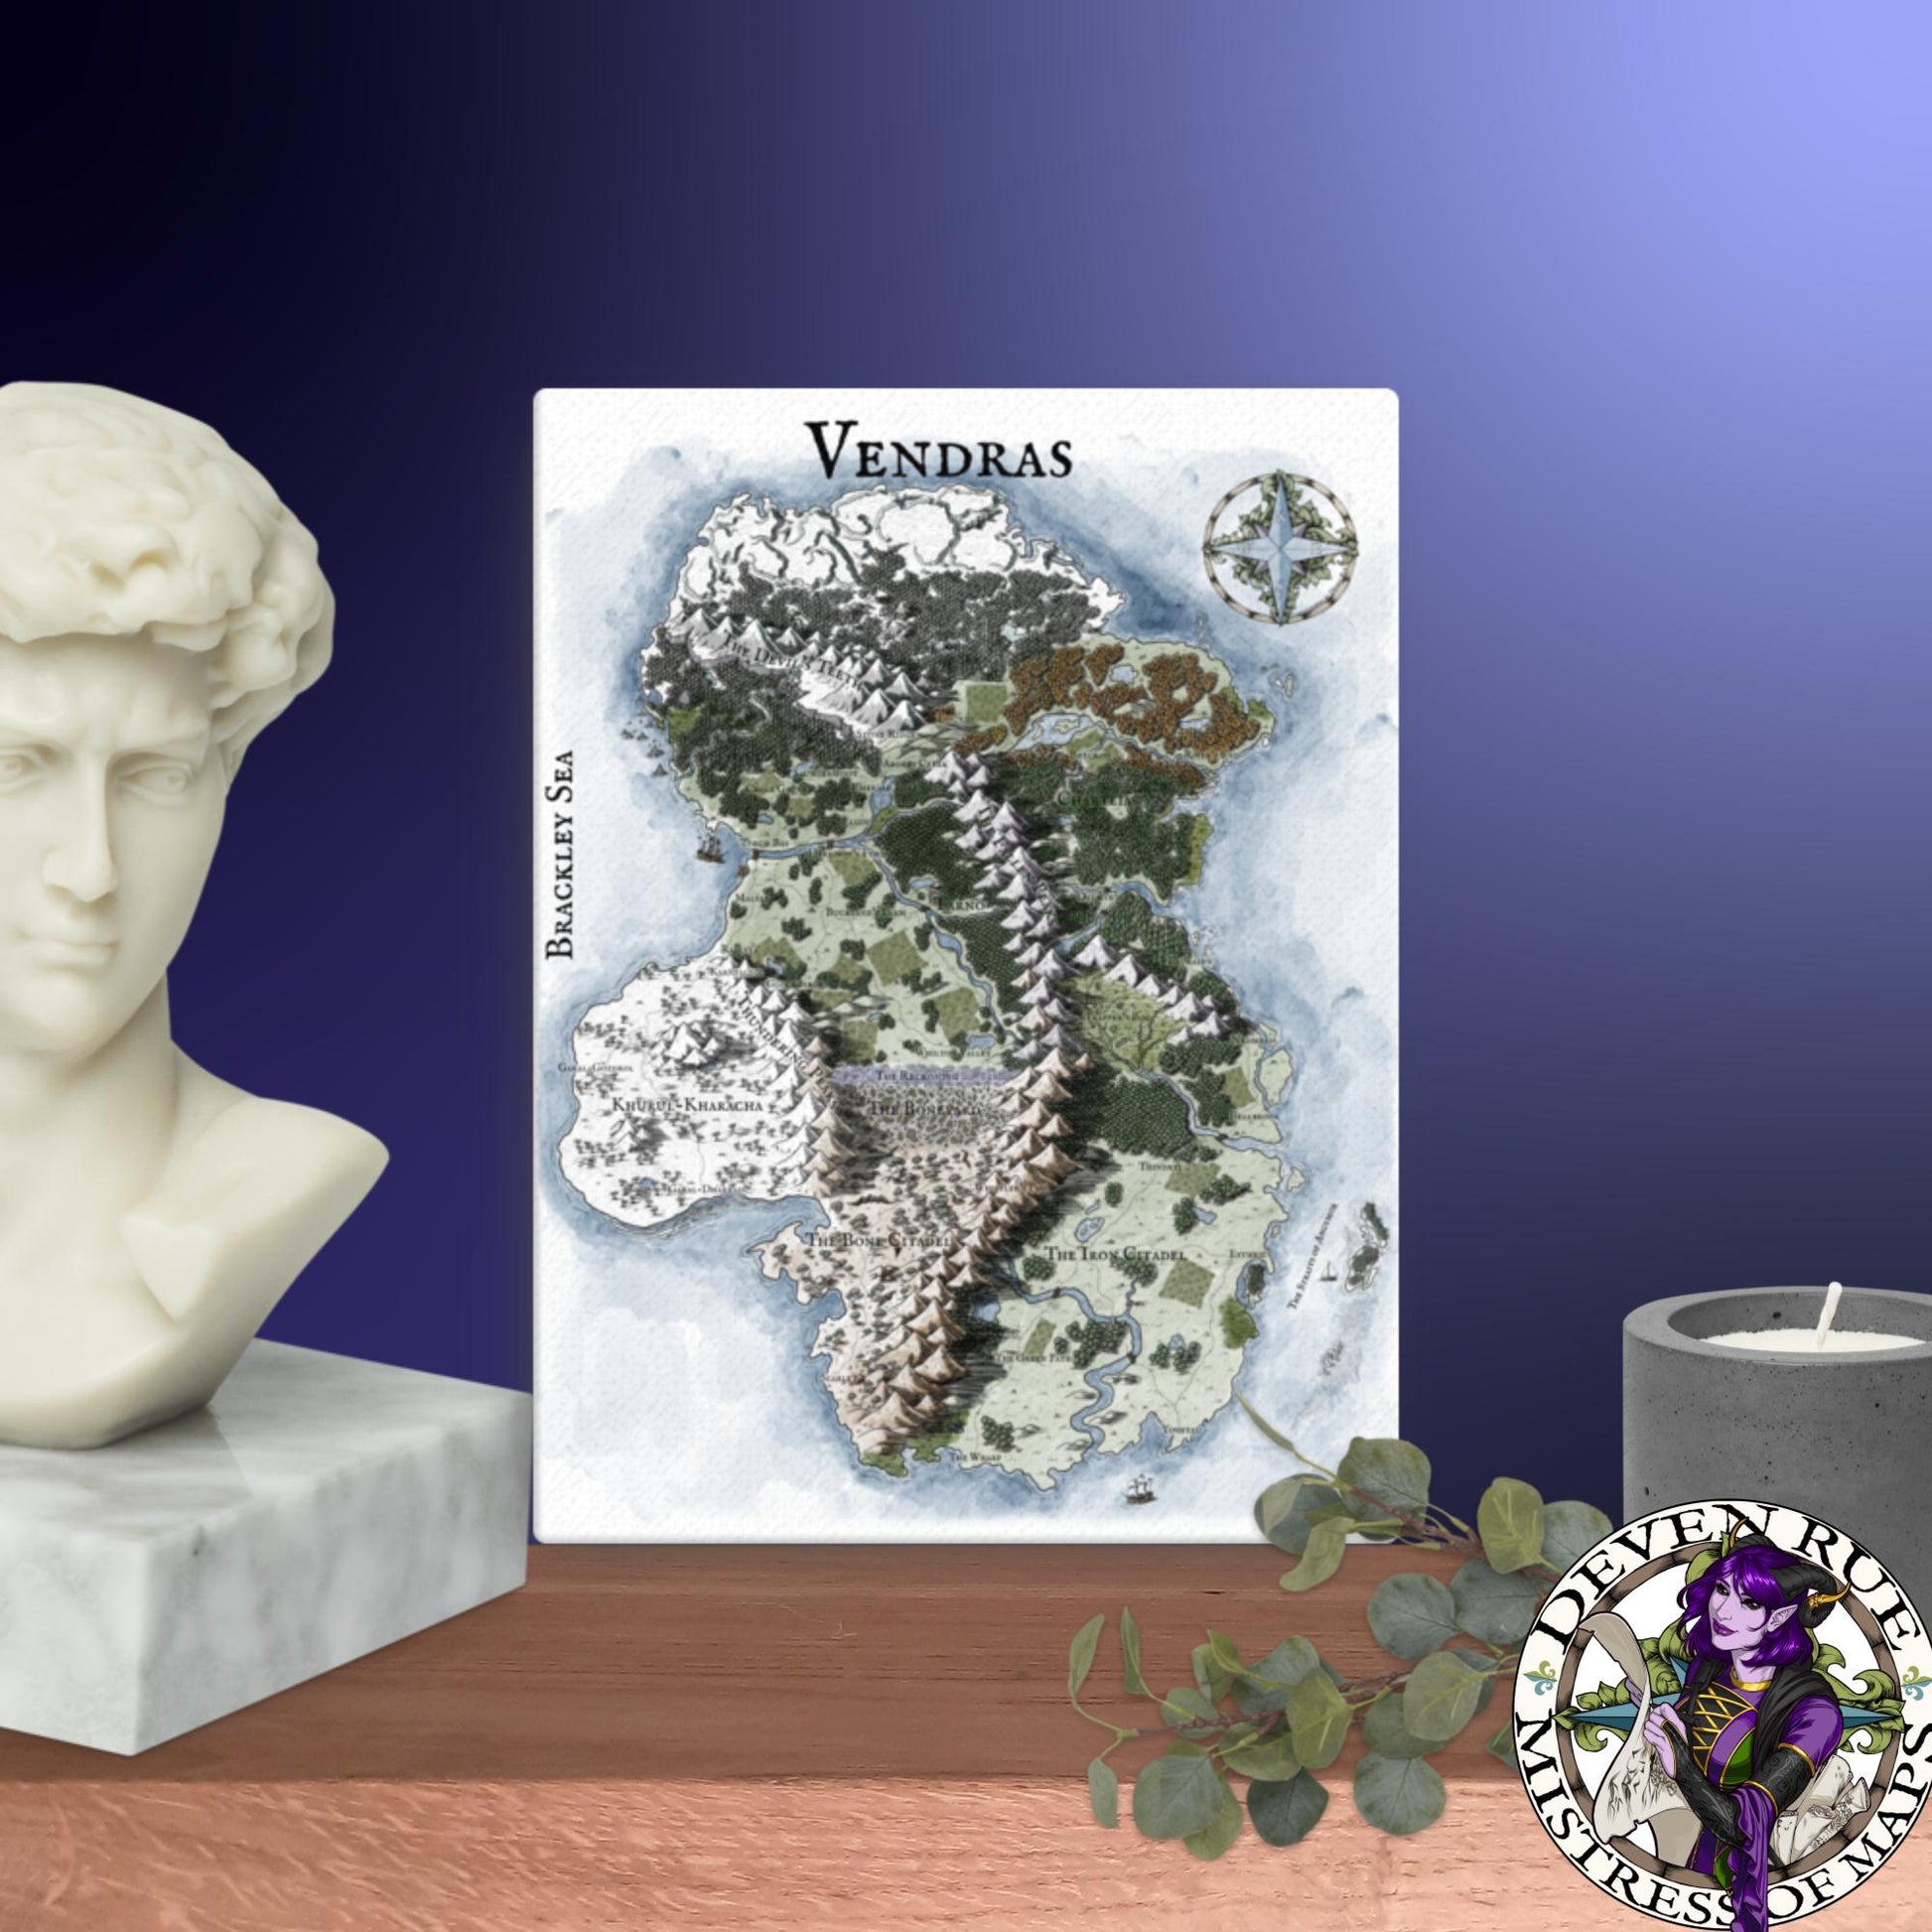 A 12" by 16" canvas print of the Vendras map by Deven Rue sits on a shelf with a stone bust, candle, and greenery.